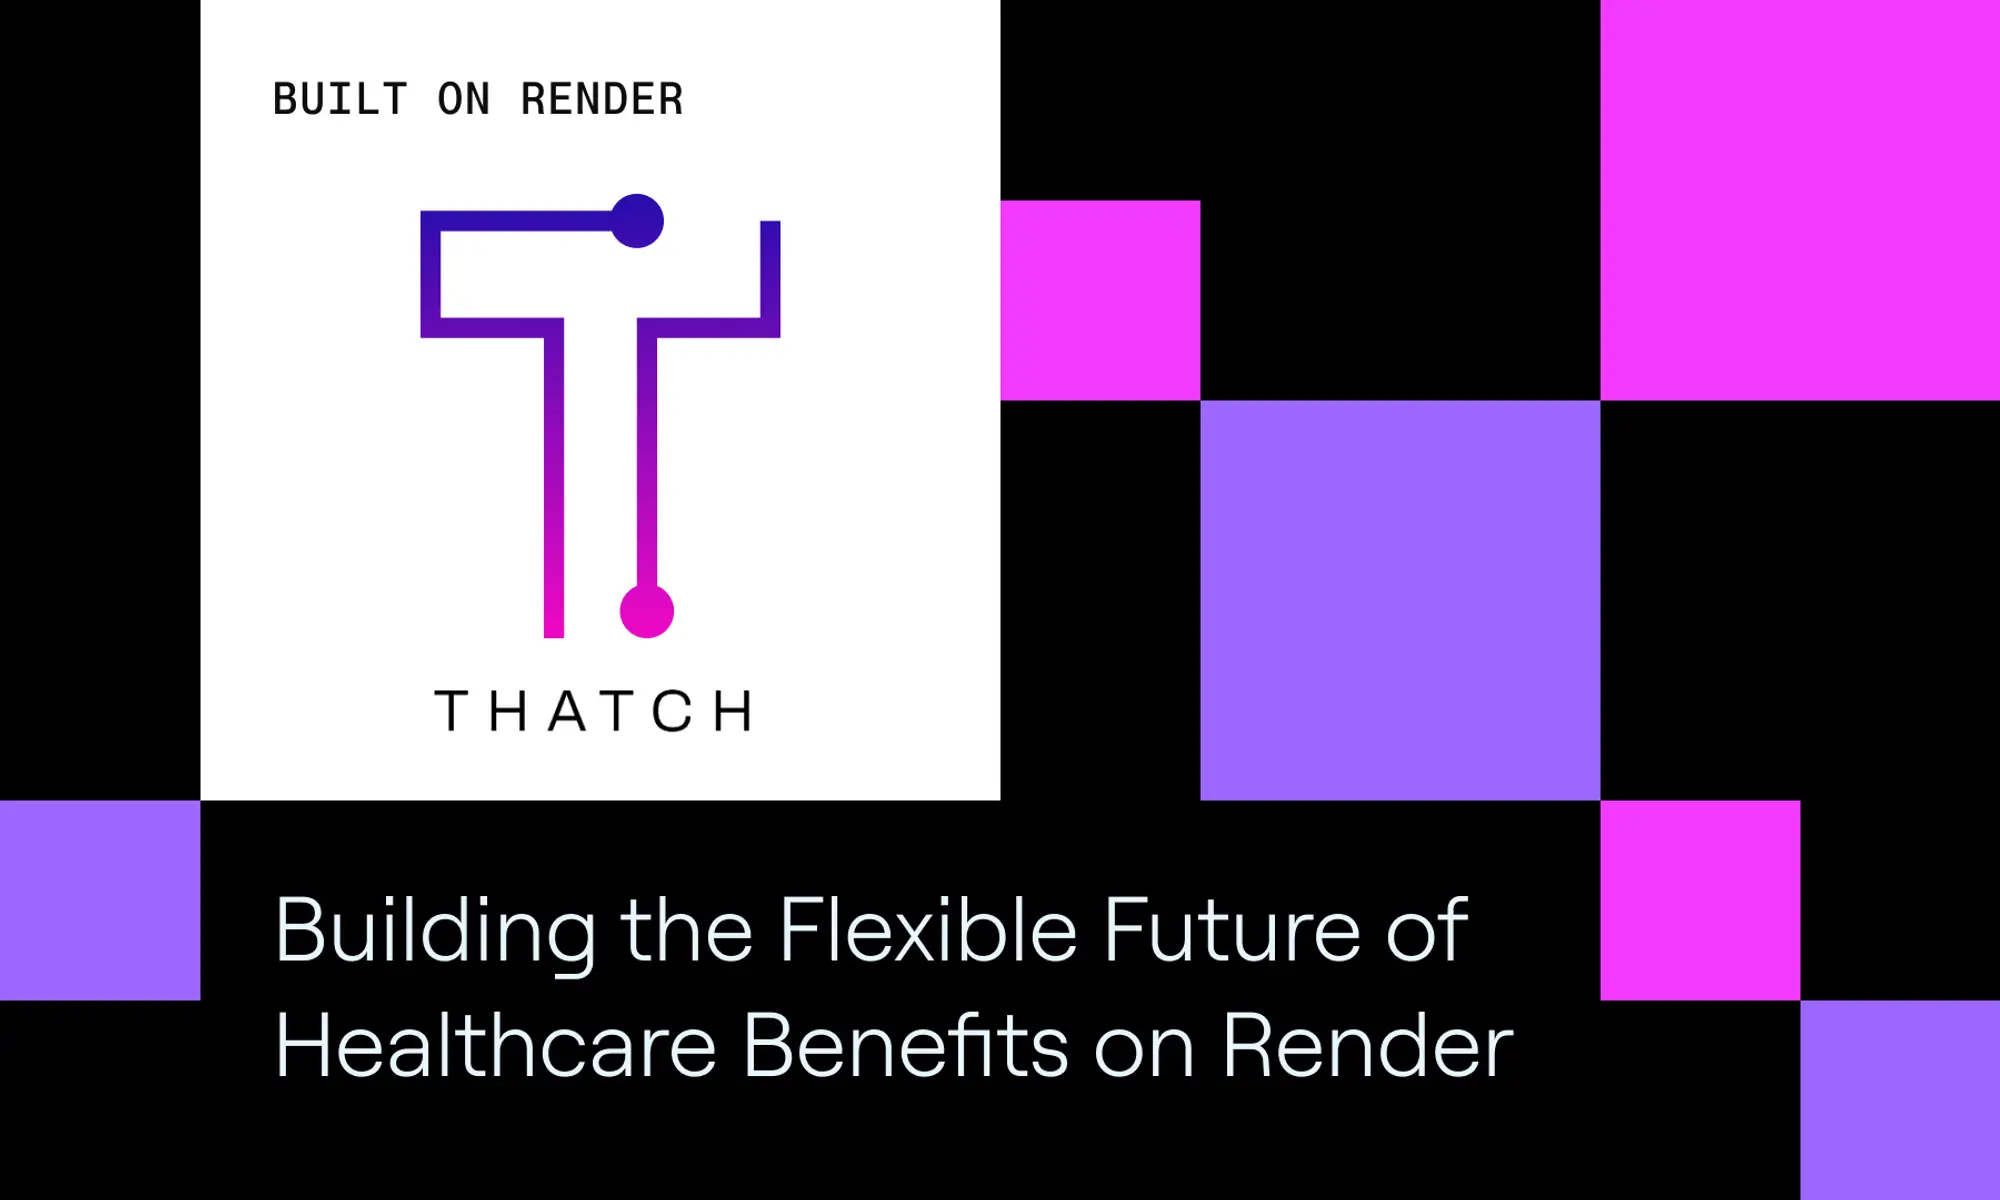 How Thatch is Building the Flexible Future of Healthcare Benefits on Render